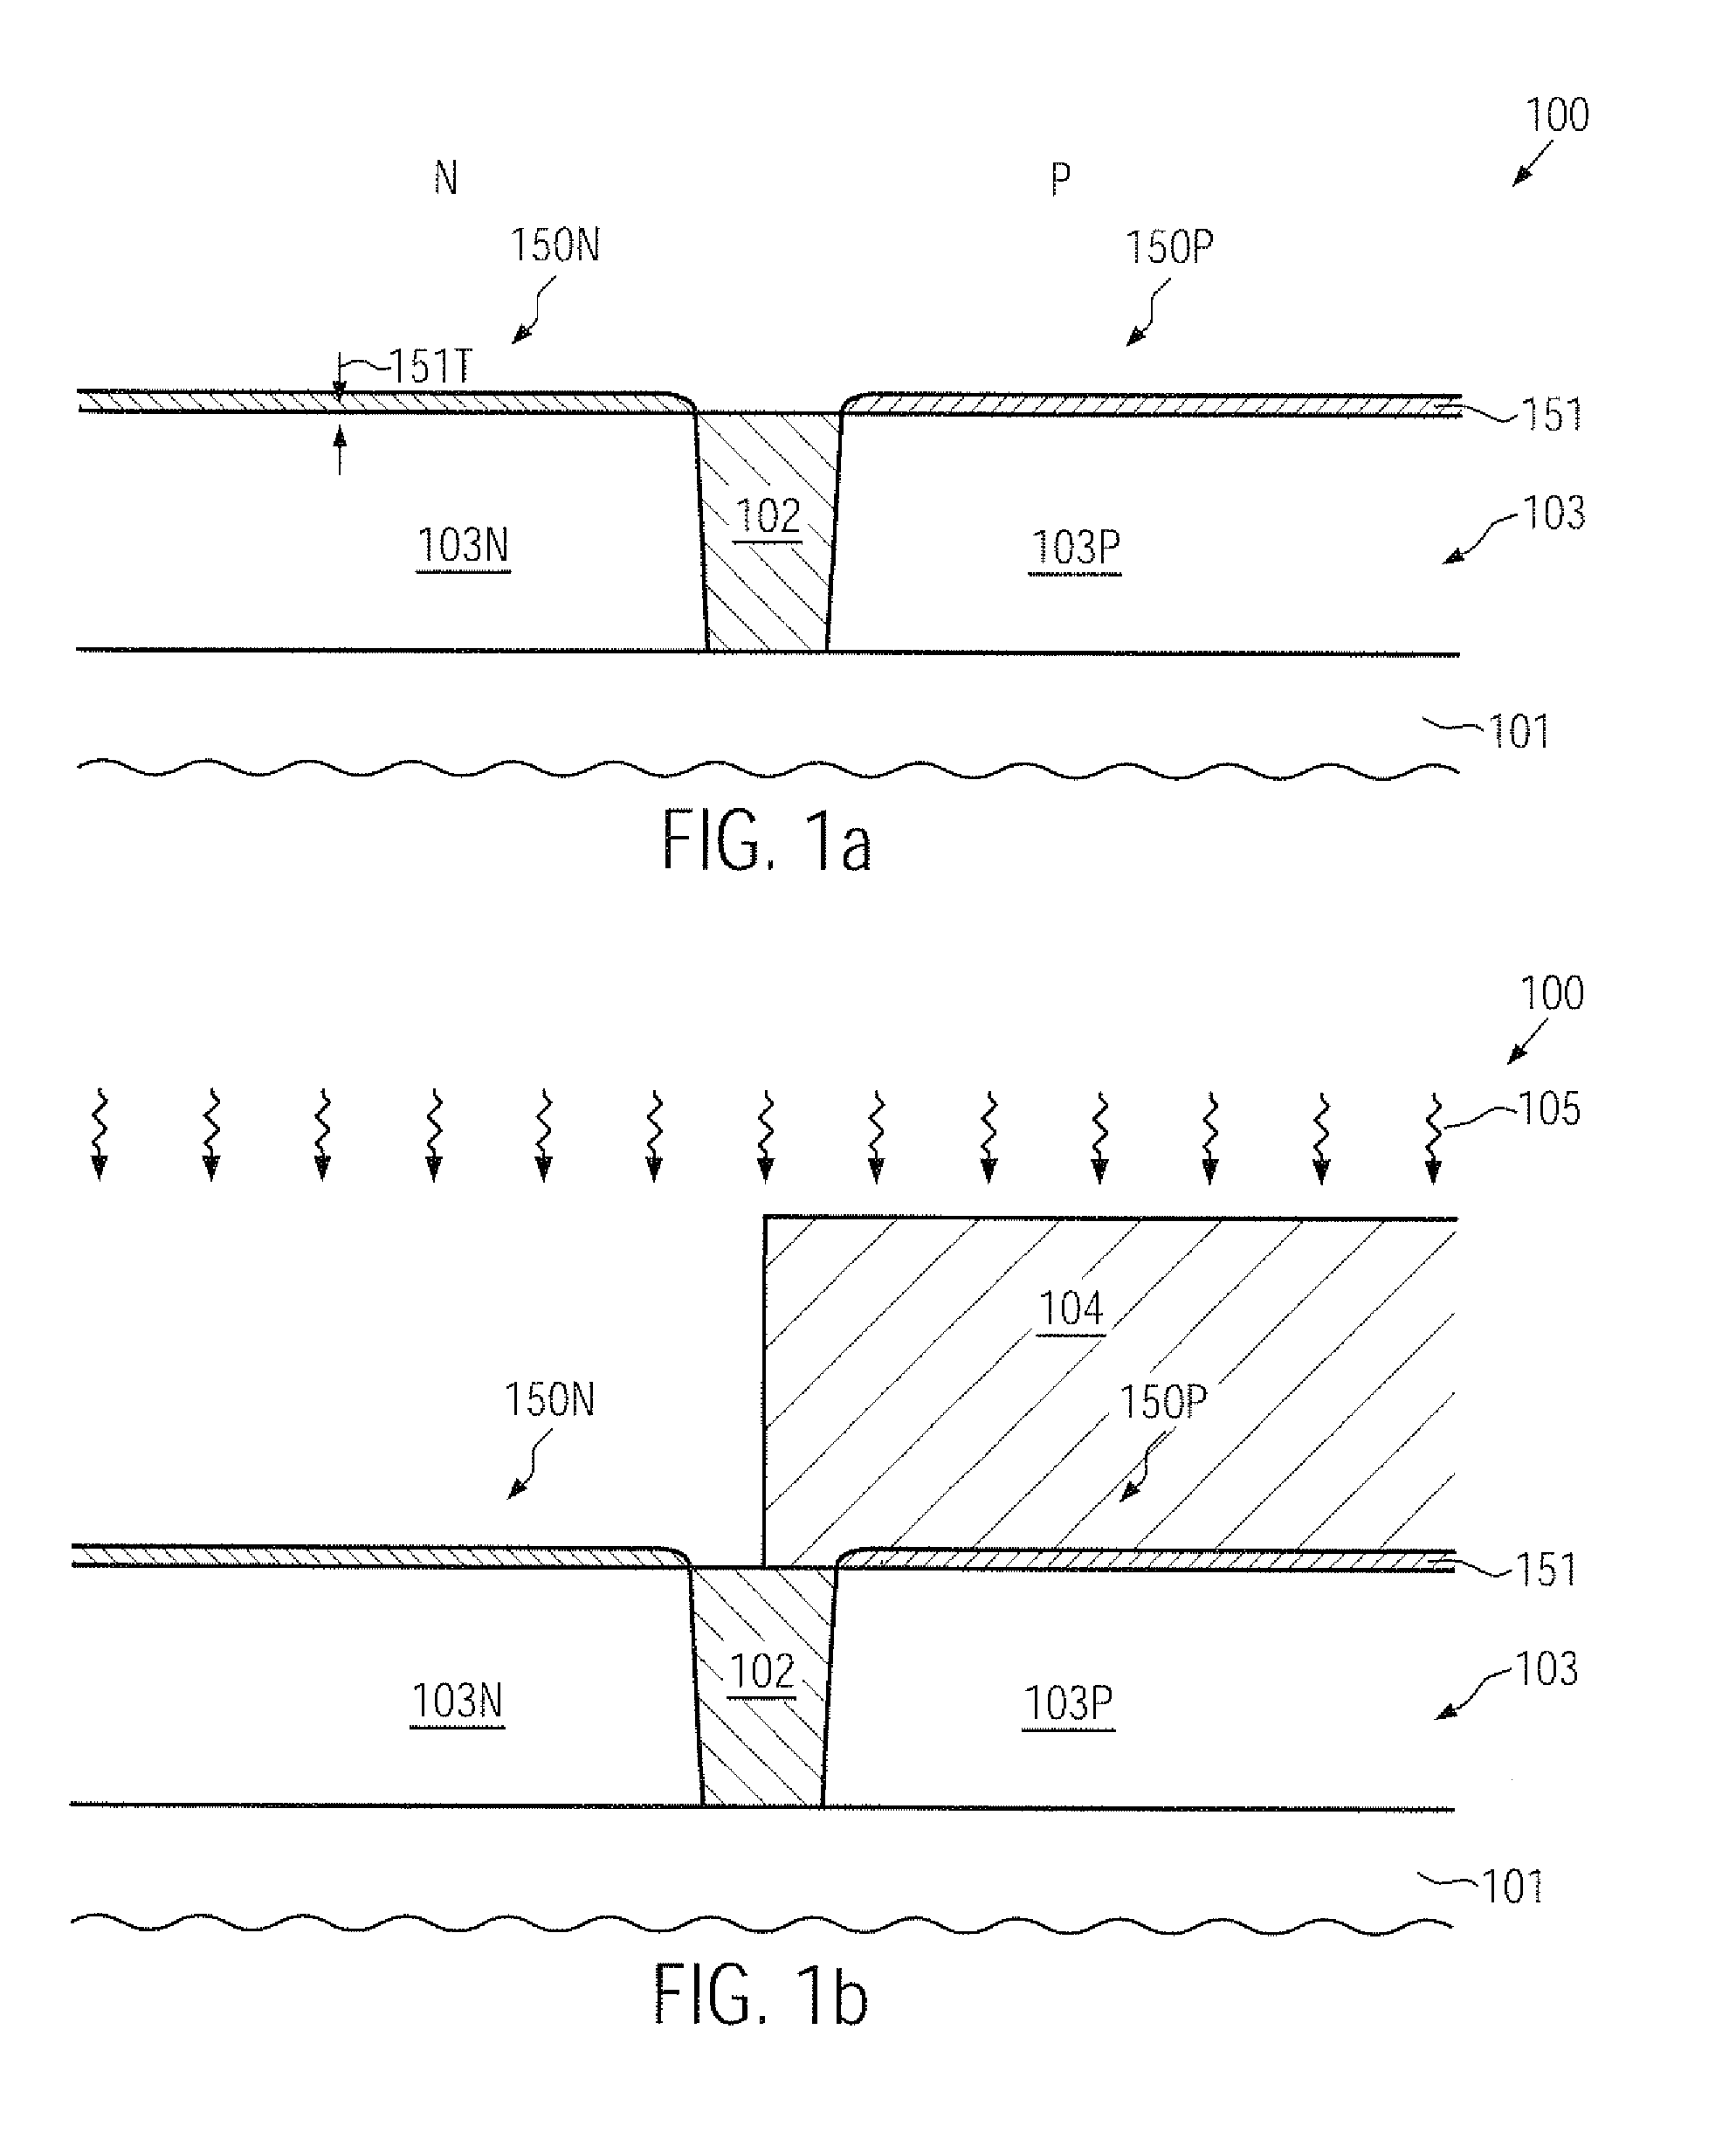 Gate dielectrics of different thickness in PMOS and NMOS transistors